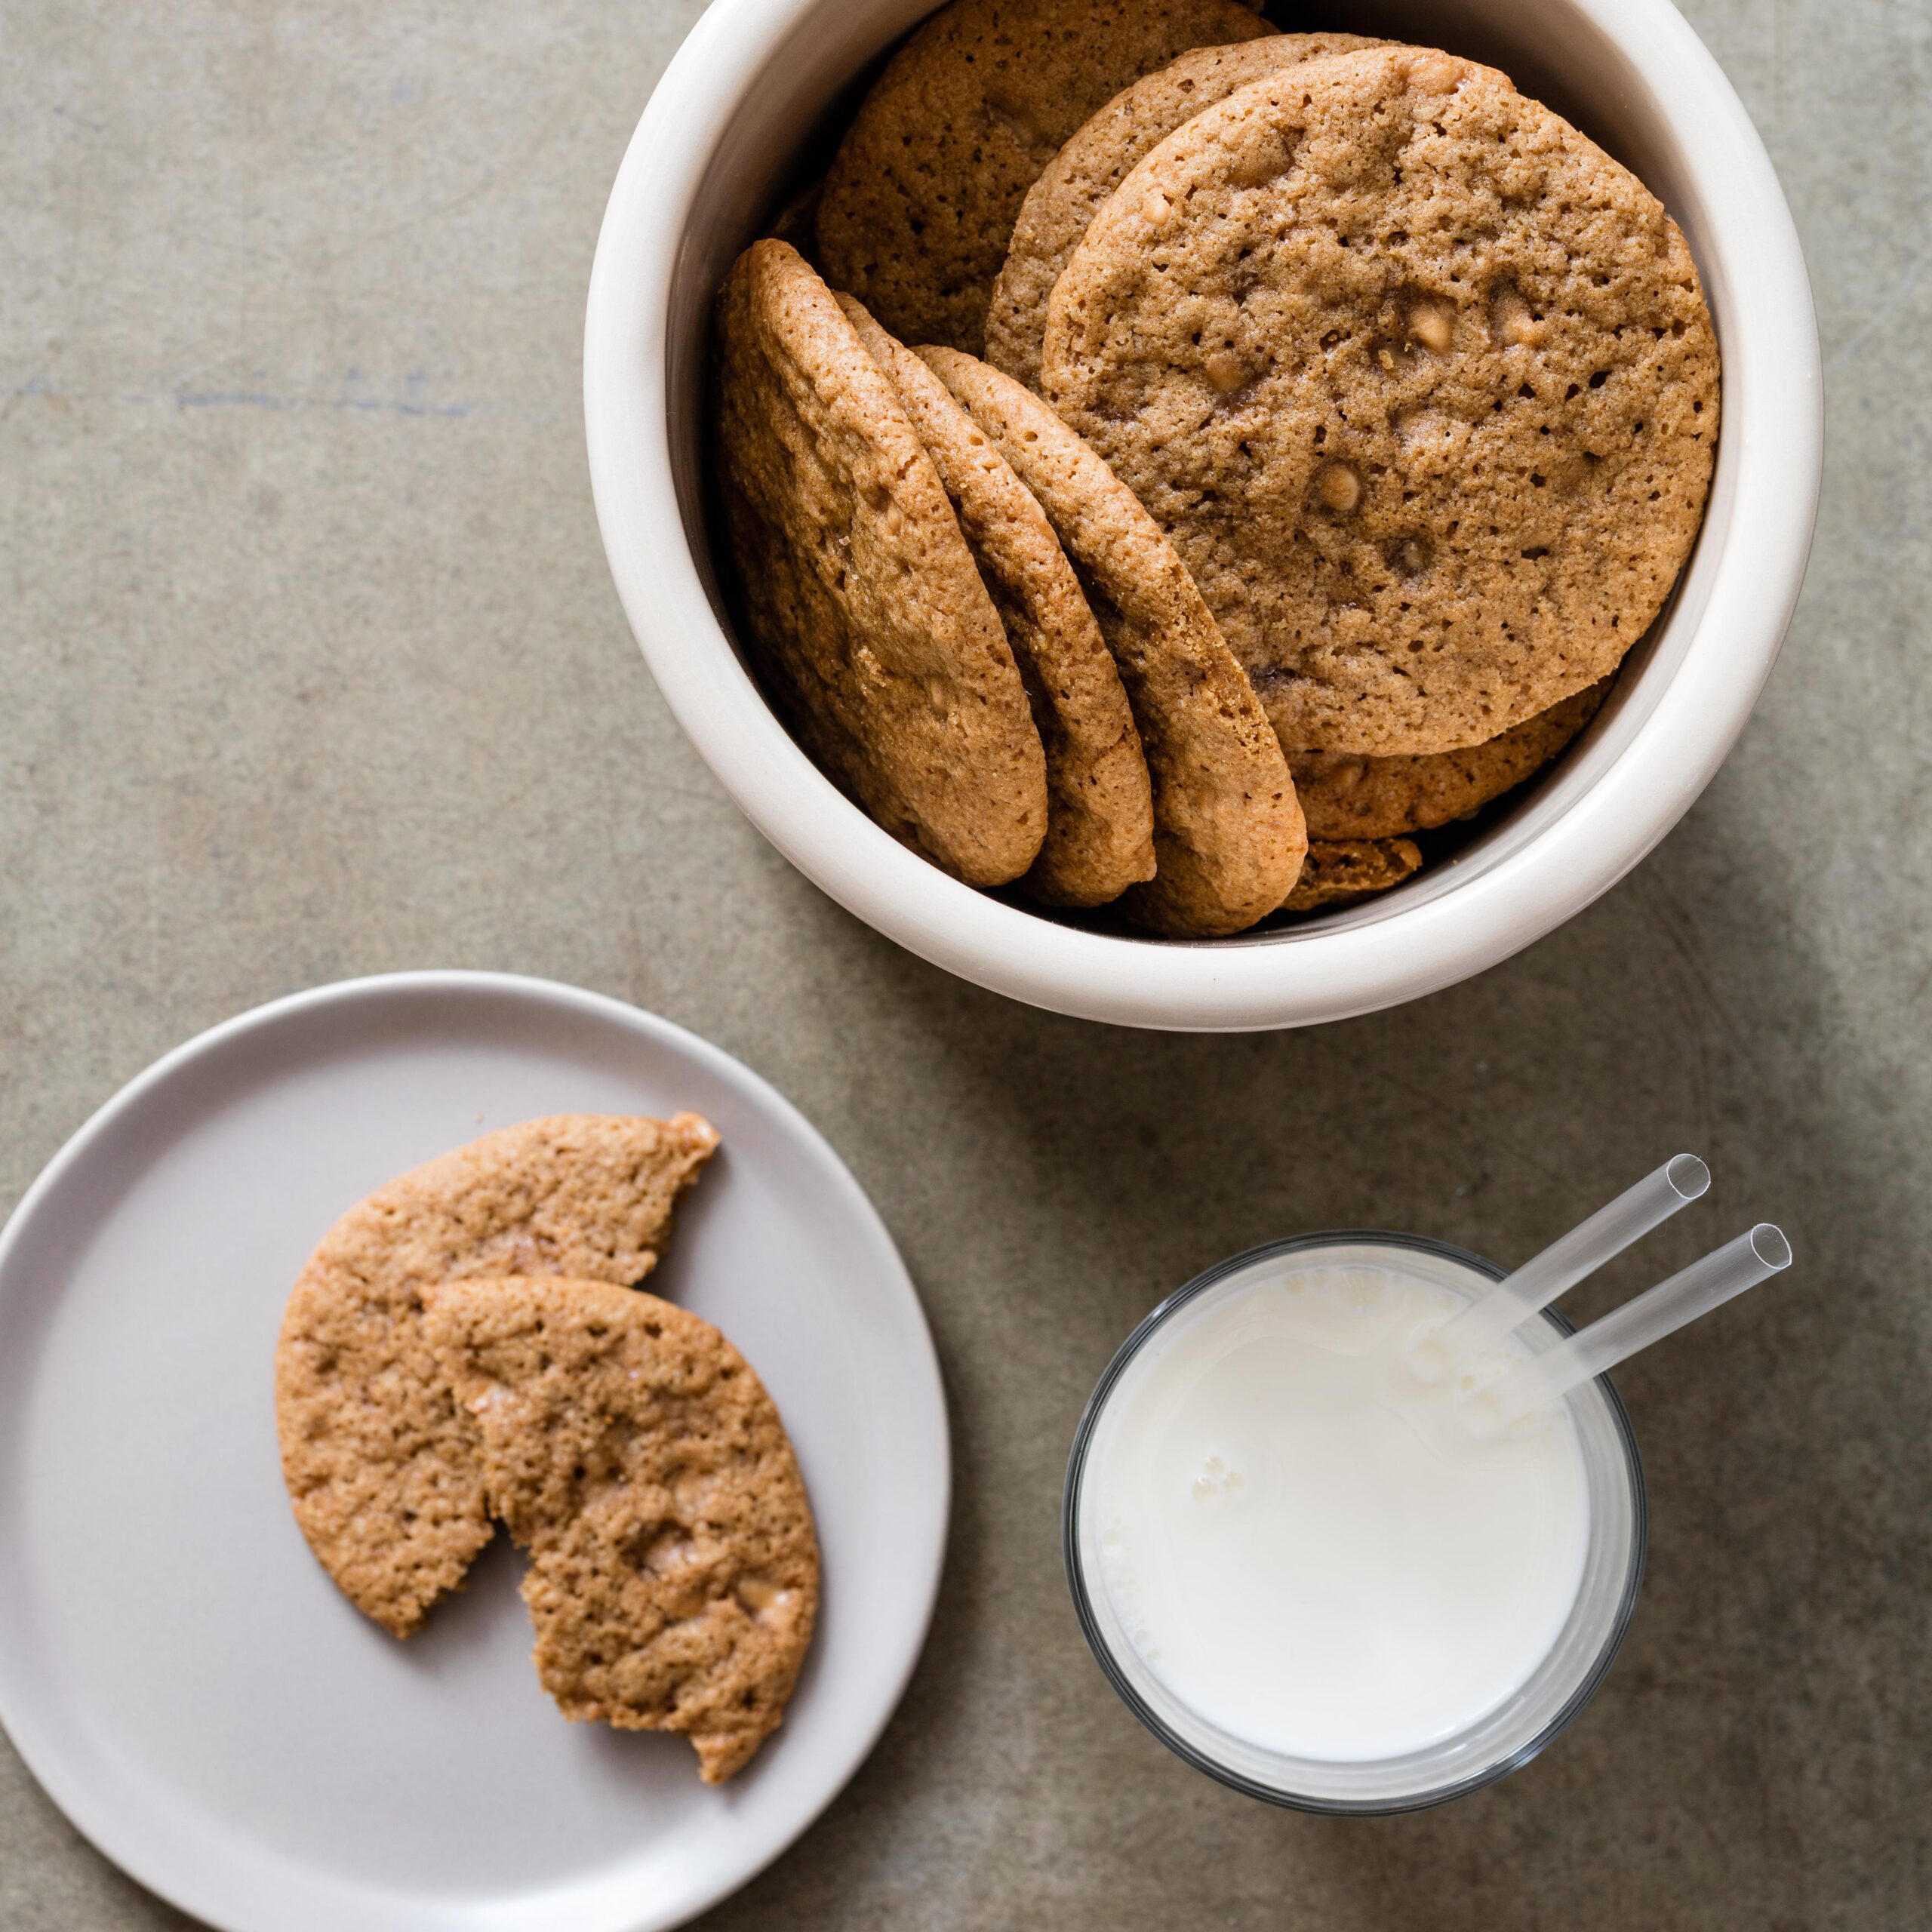  If you're a fan of coffee and toffee, these cookies are a must-try.